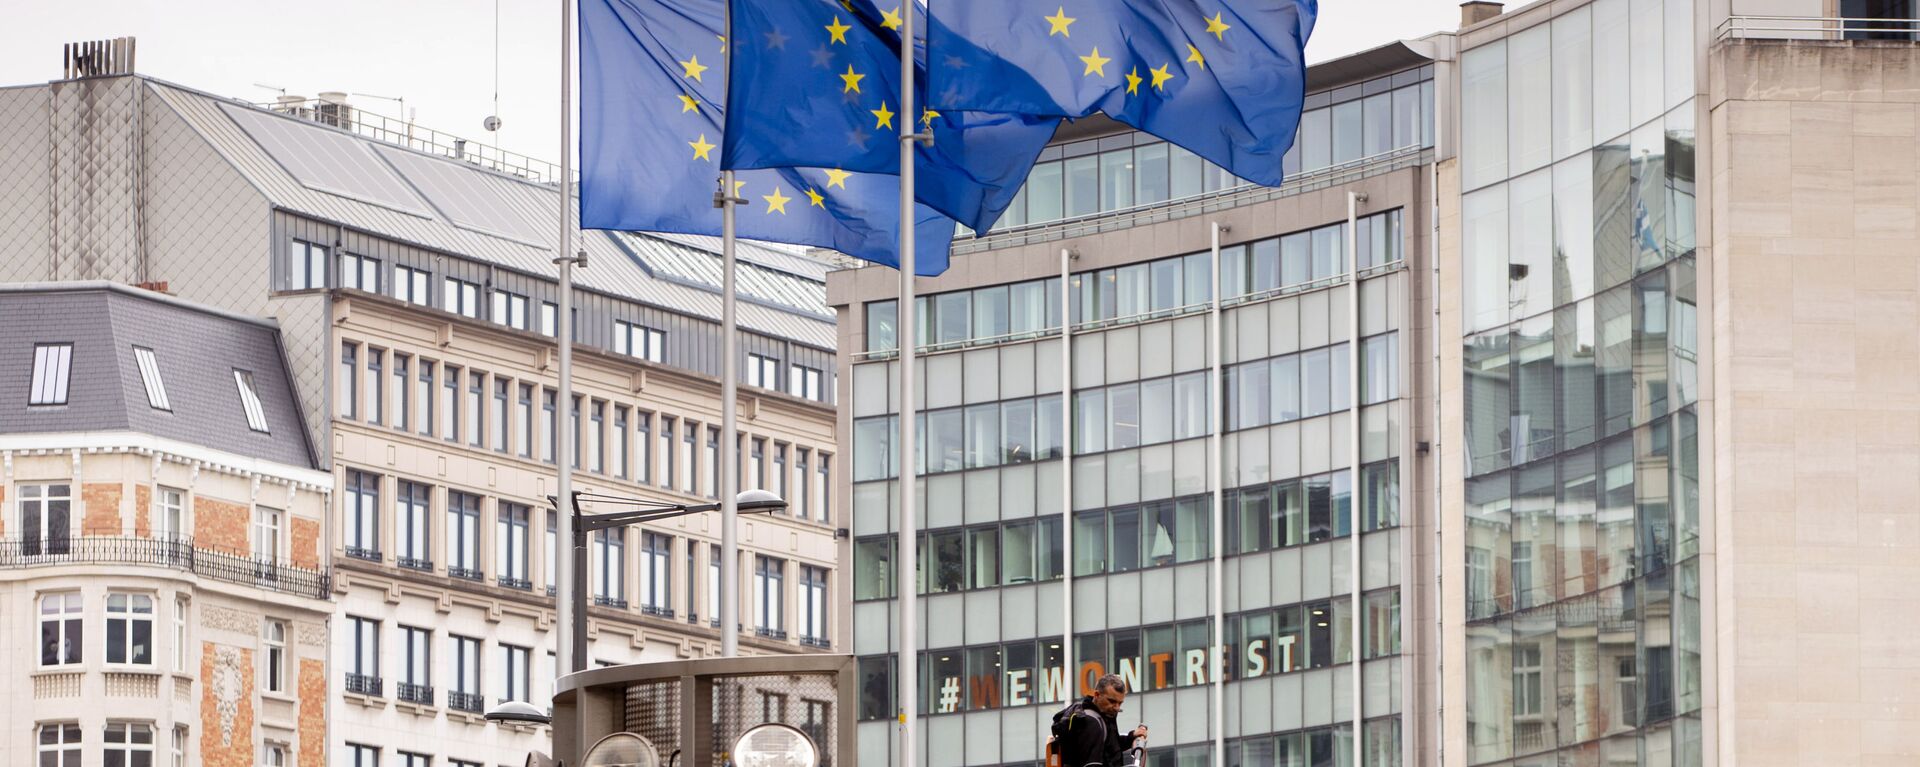 European Union flags flap in the wind as two gardeners work on the outside of EU headquarters in Brussels, Wednesday, Sept. 11, 2019.  - Sputnik International, 1920, 06.10.2022